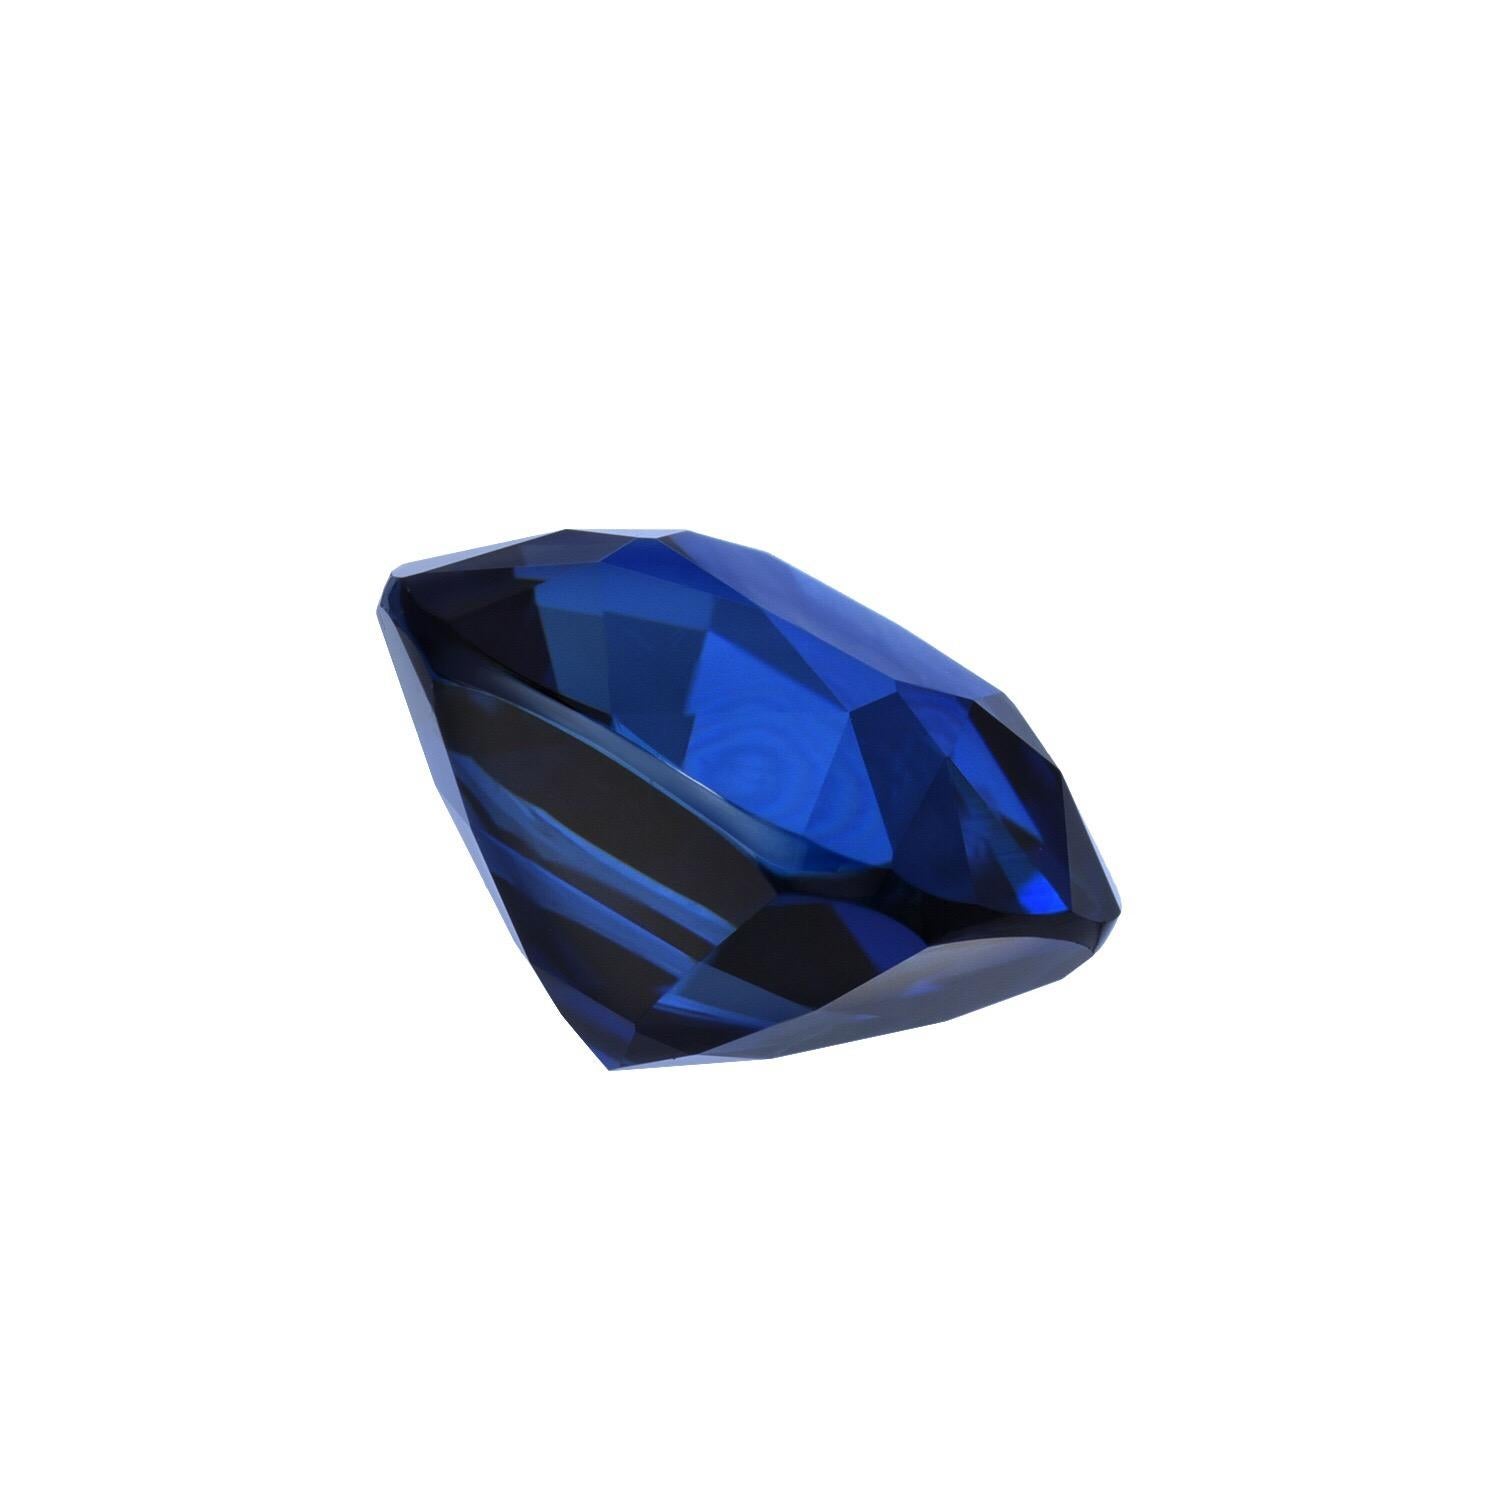 Superior 3.04 carat unheated Sri Lanka (Ceylon) Sapphire cushion. This Sapphire is an exceptional choice for a custom tailored cocktail or engagement ring. Accompanied by GIA report #6194892194 stating that the Sapphire is of Sri Lankan origin with